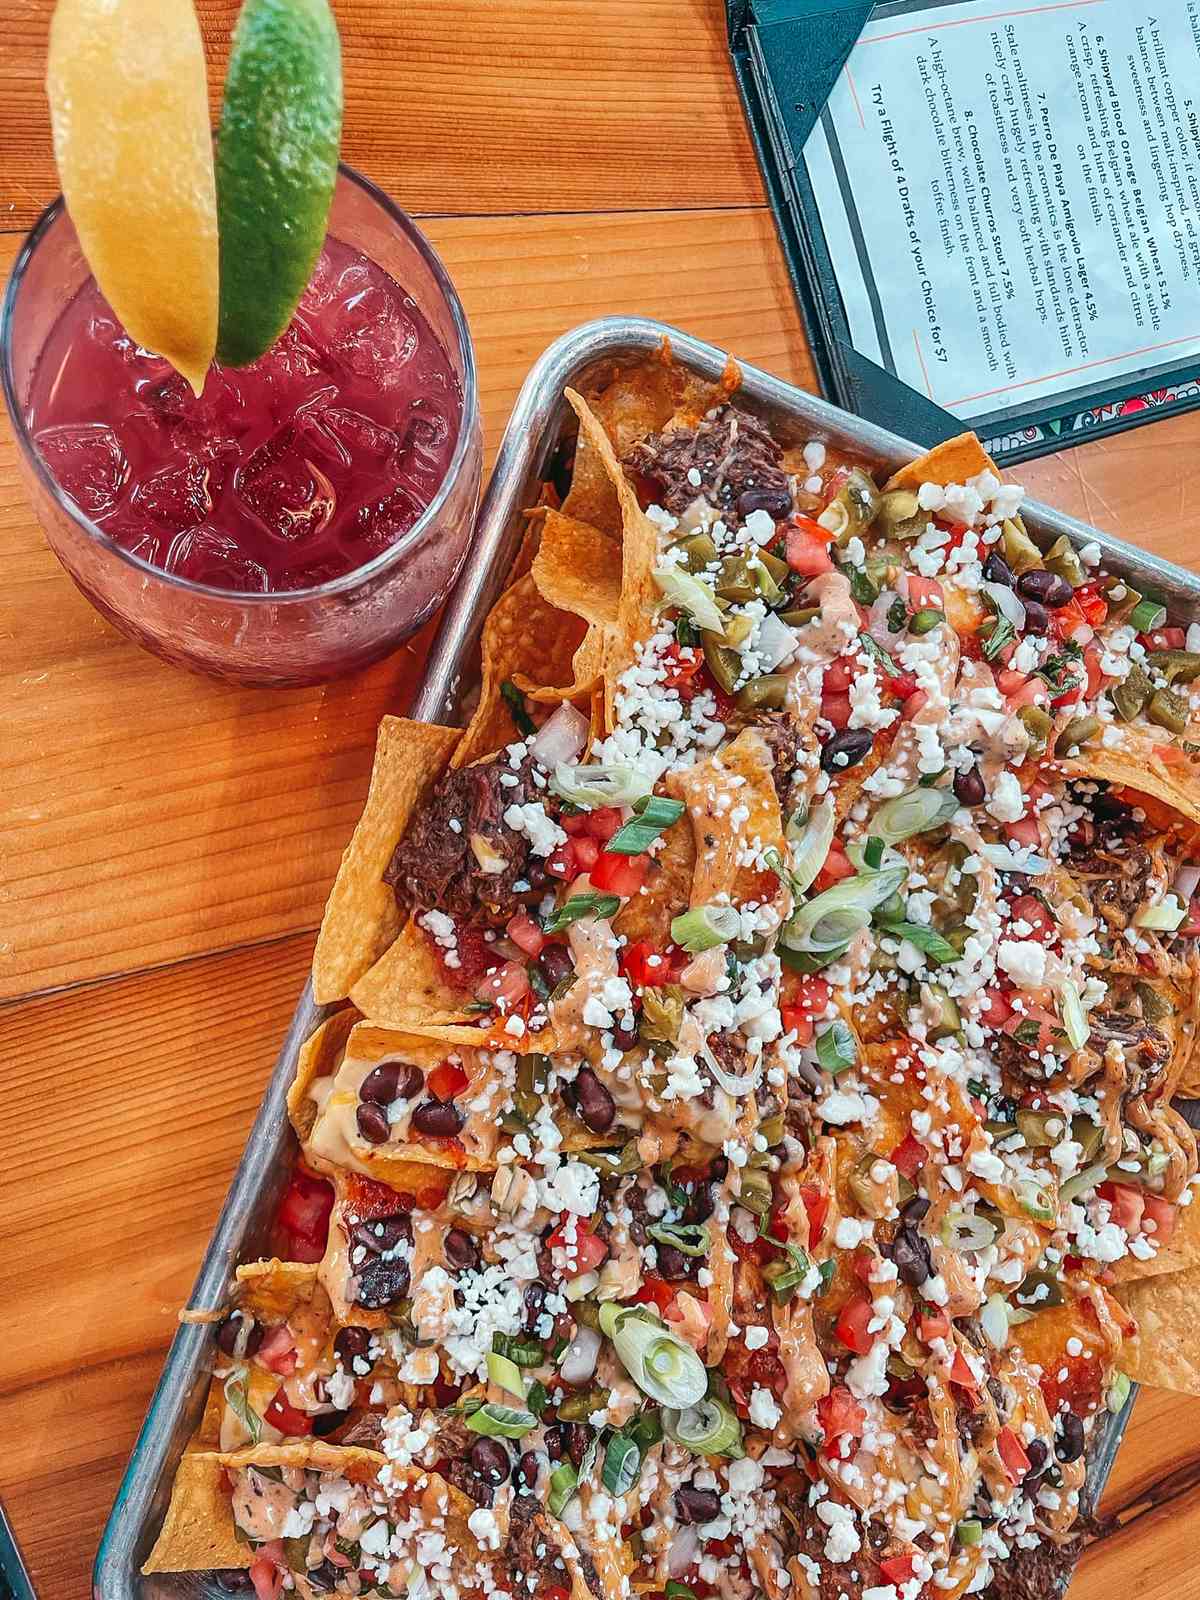 nachos from seadogs brewery in Gulfport, Florida